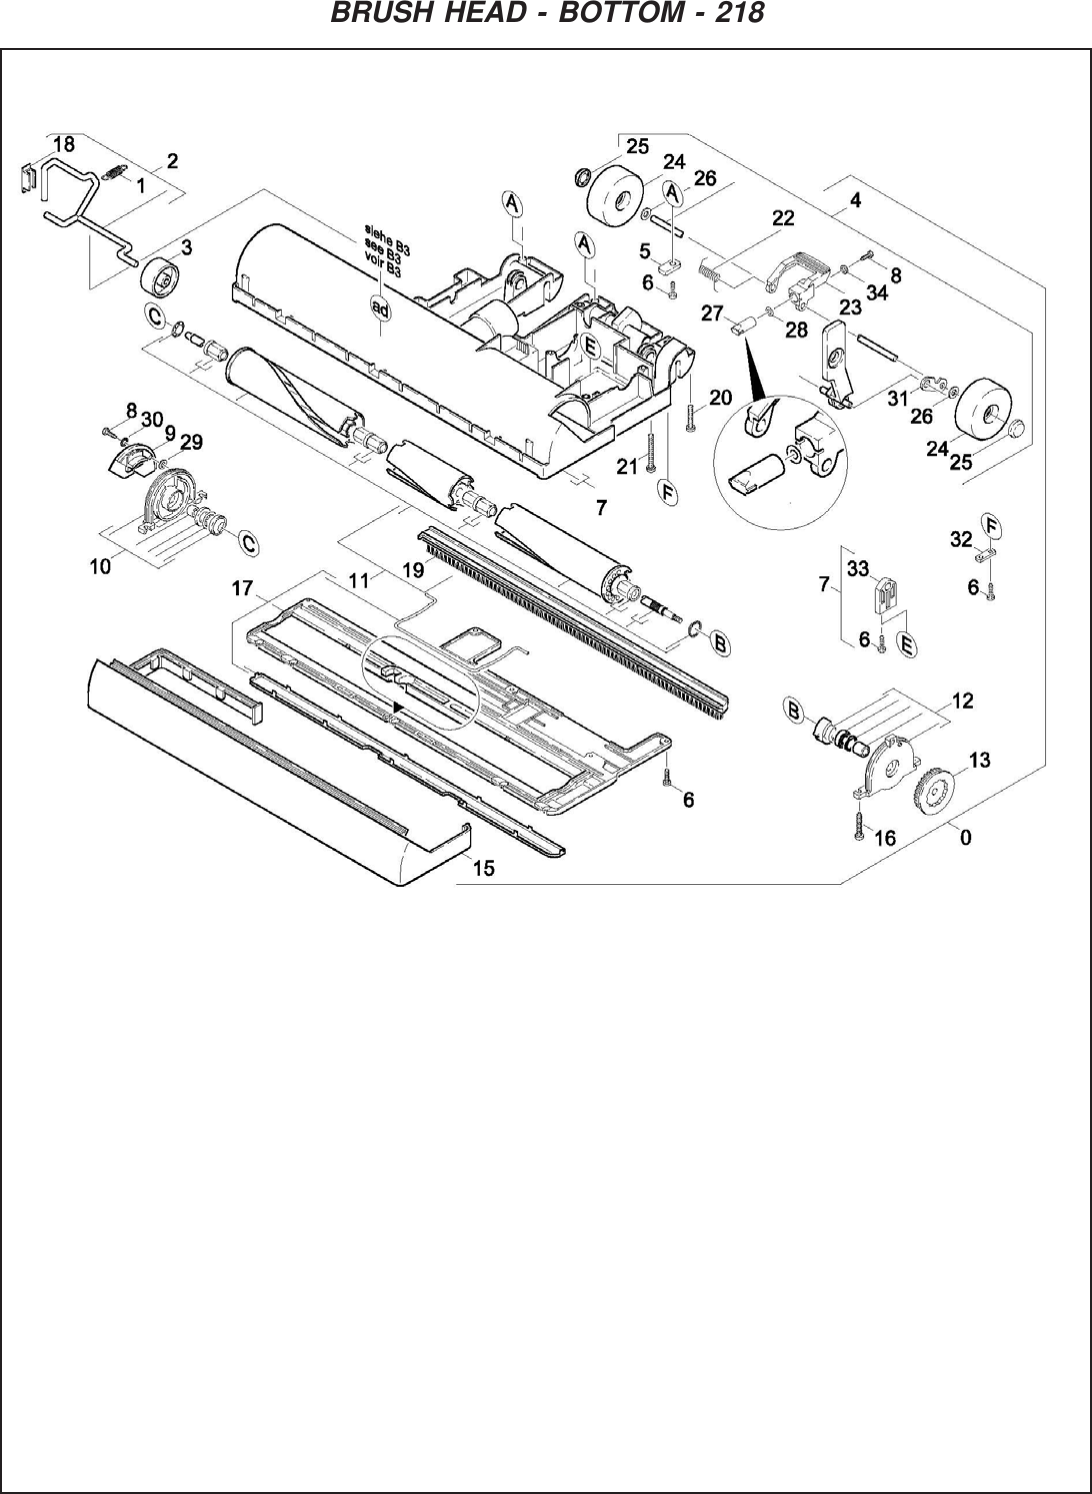 Page 11 of 12 - 9097272 Pacer Dual Motor Illustrated Parts Book.pmd  Nss-pacer-214-ue-218-ue-upright-vacuum-parts-manual